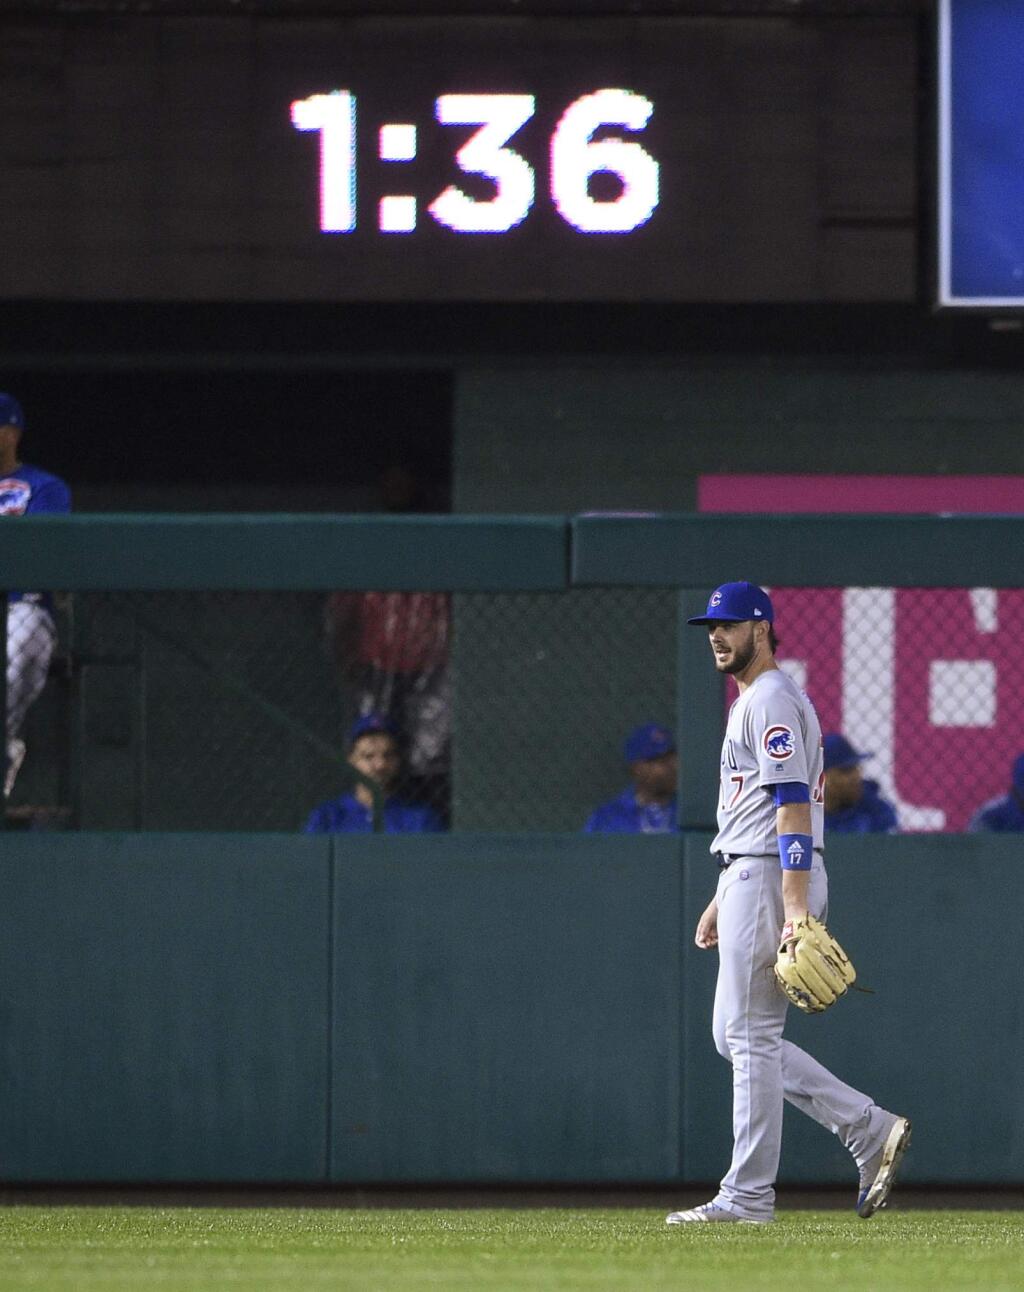 Baseball has made several changes to speed up the game, such as limiting the time of mound visits and allowing instant intentional walks, something Chicago Cubs left fielder Kris Bryant, above, has received five times this season. (AP Photo/Nick Wass)